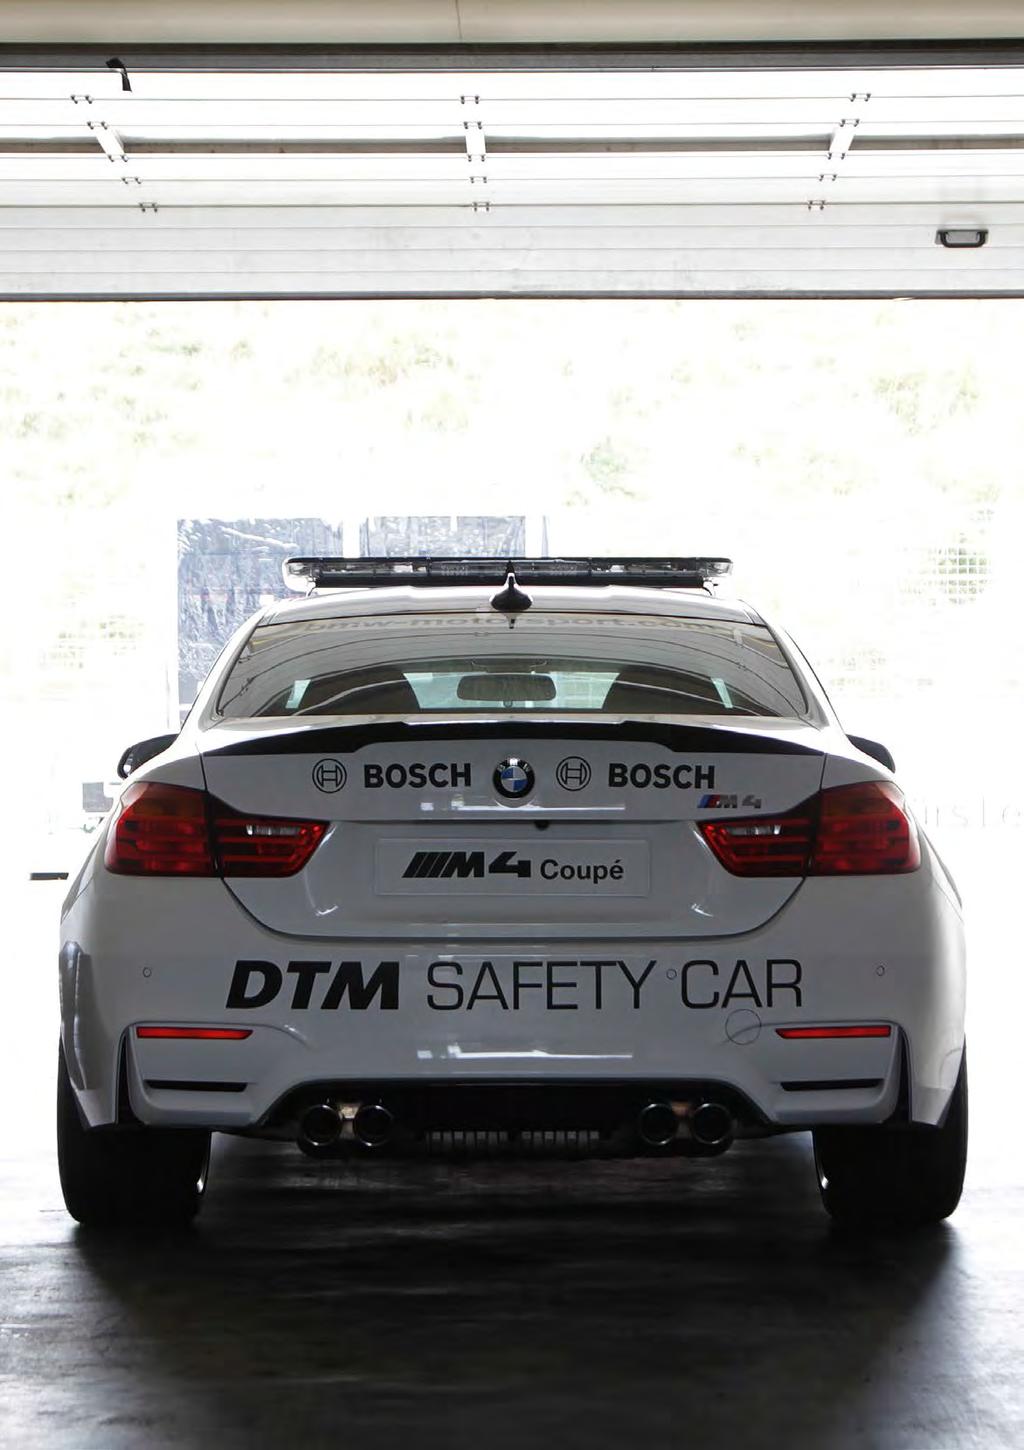 To lead the 24 DTM racing cars masterfully around the circuit, the Safety Car must itself offer maximum dynamic performance.